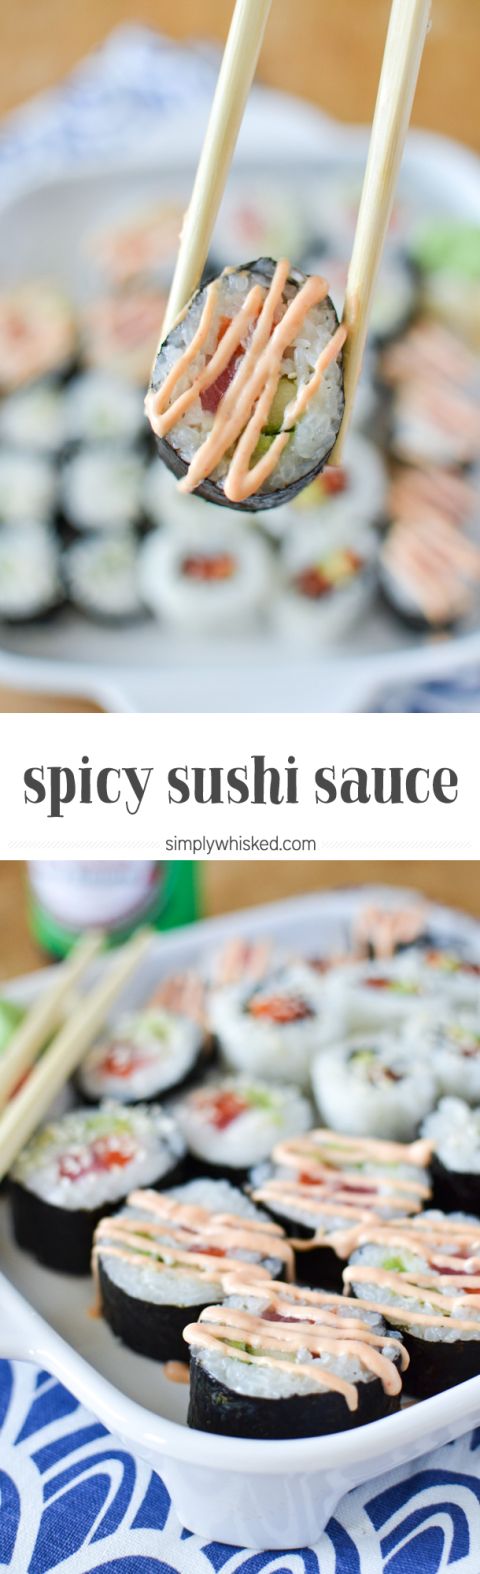 SPICY SUSHI SAUCE